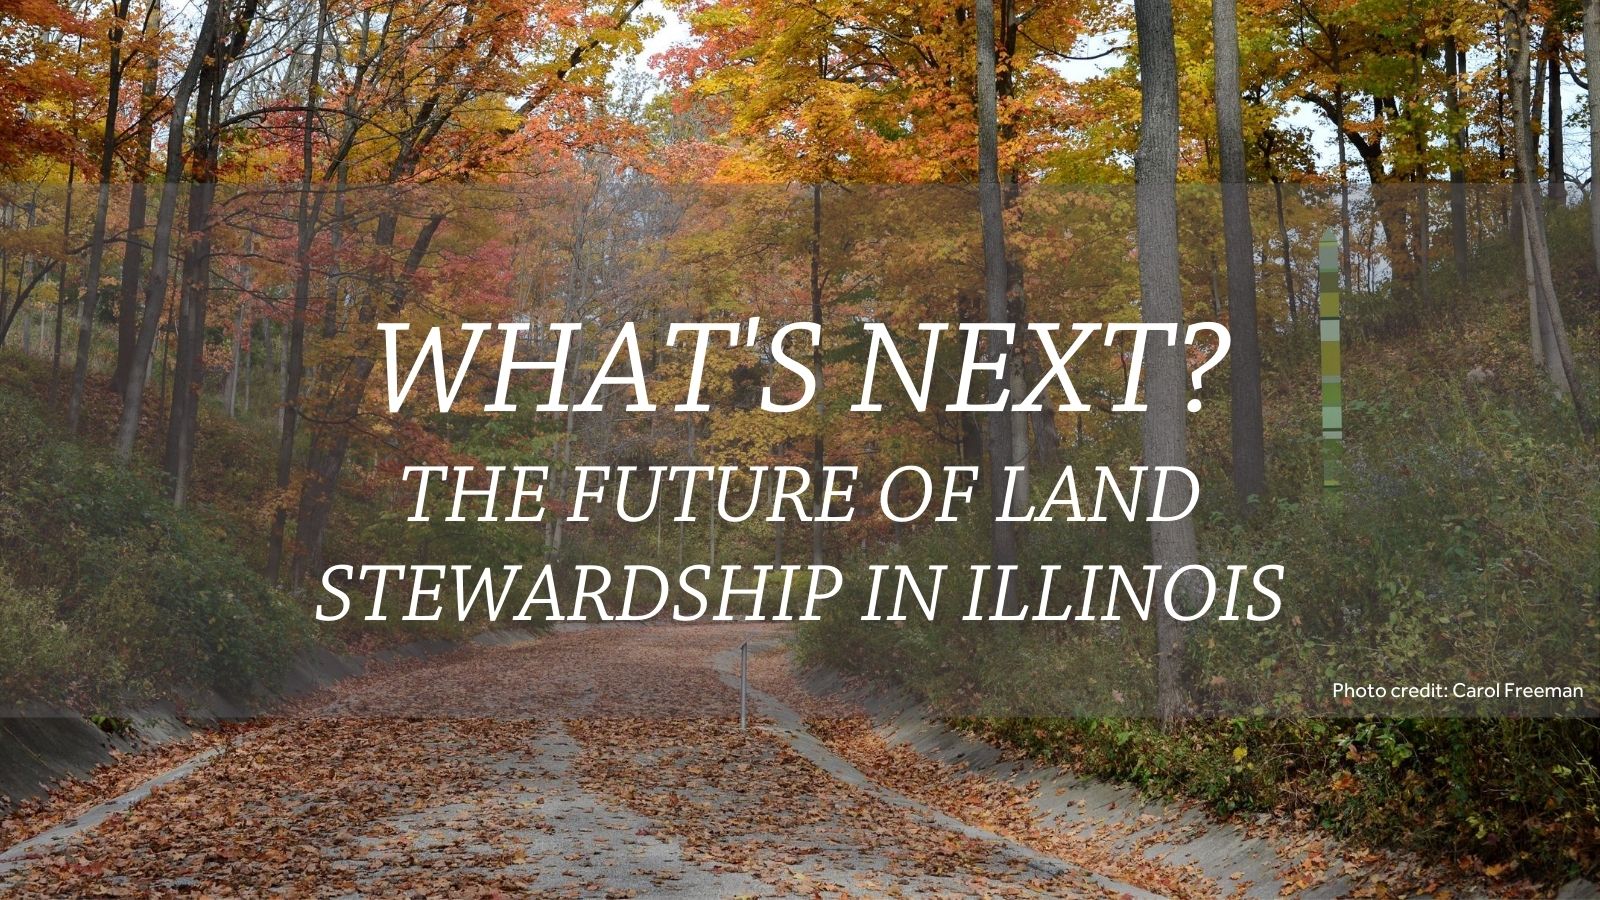 What's next - the future of land stewardship in Illinois